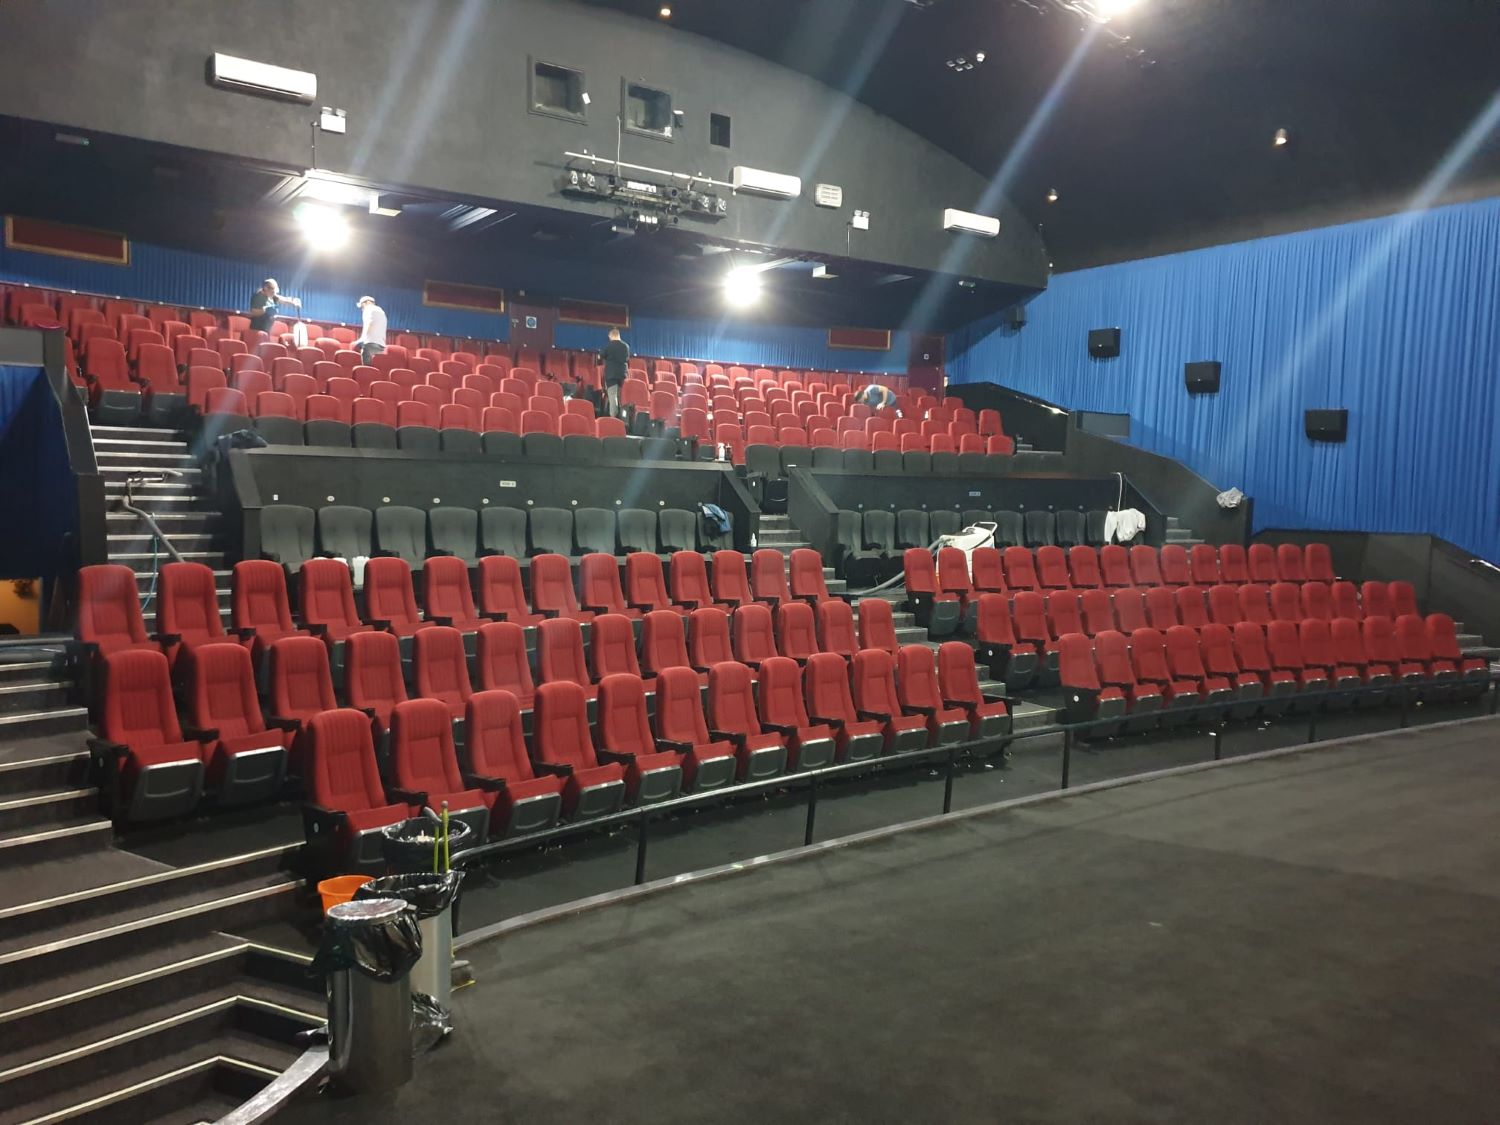 Commercial Upholstery cleaning in cinema